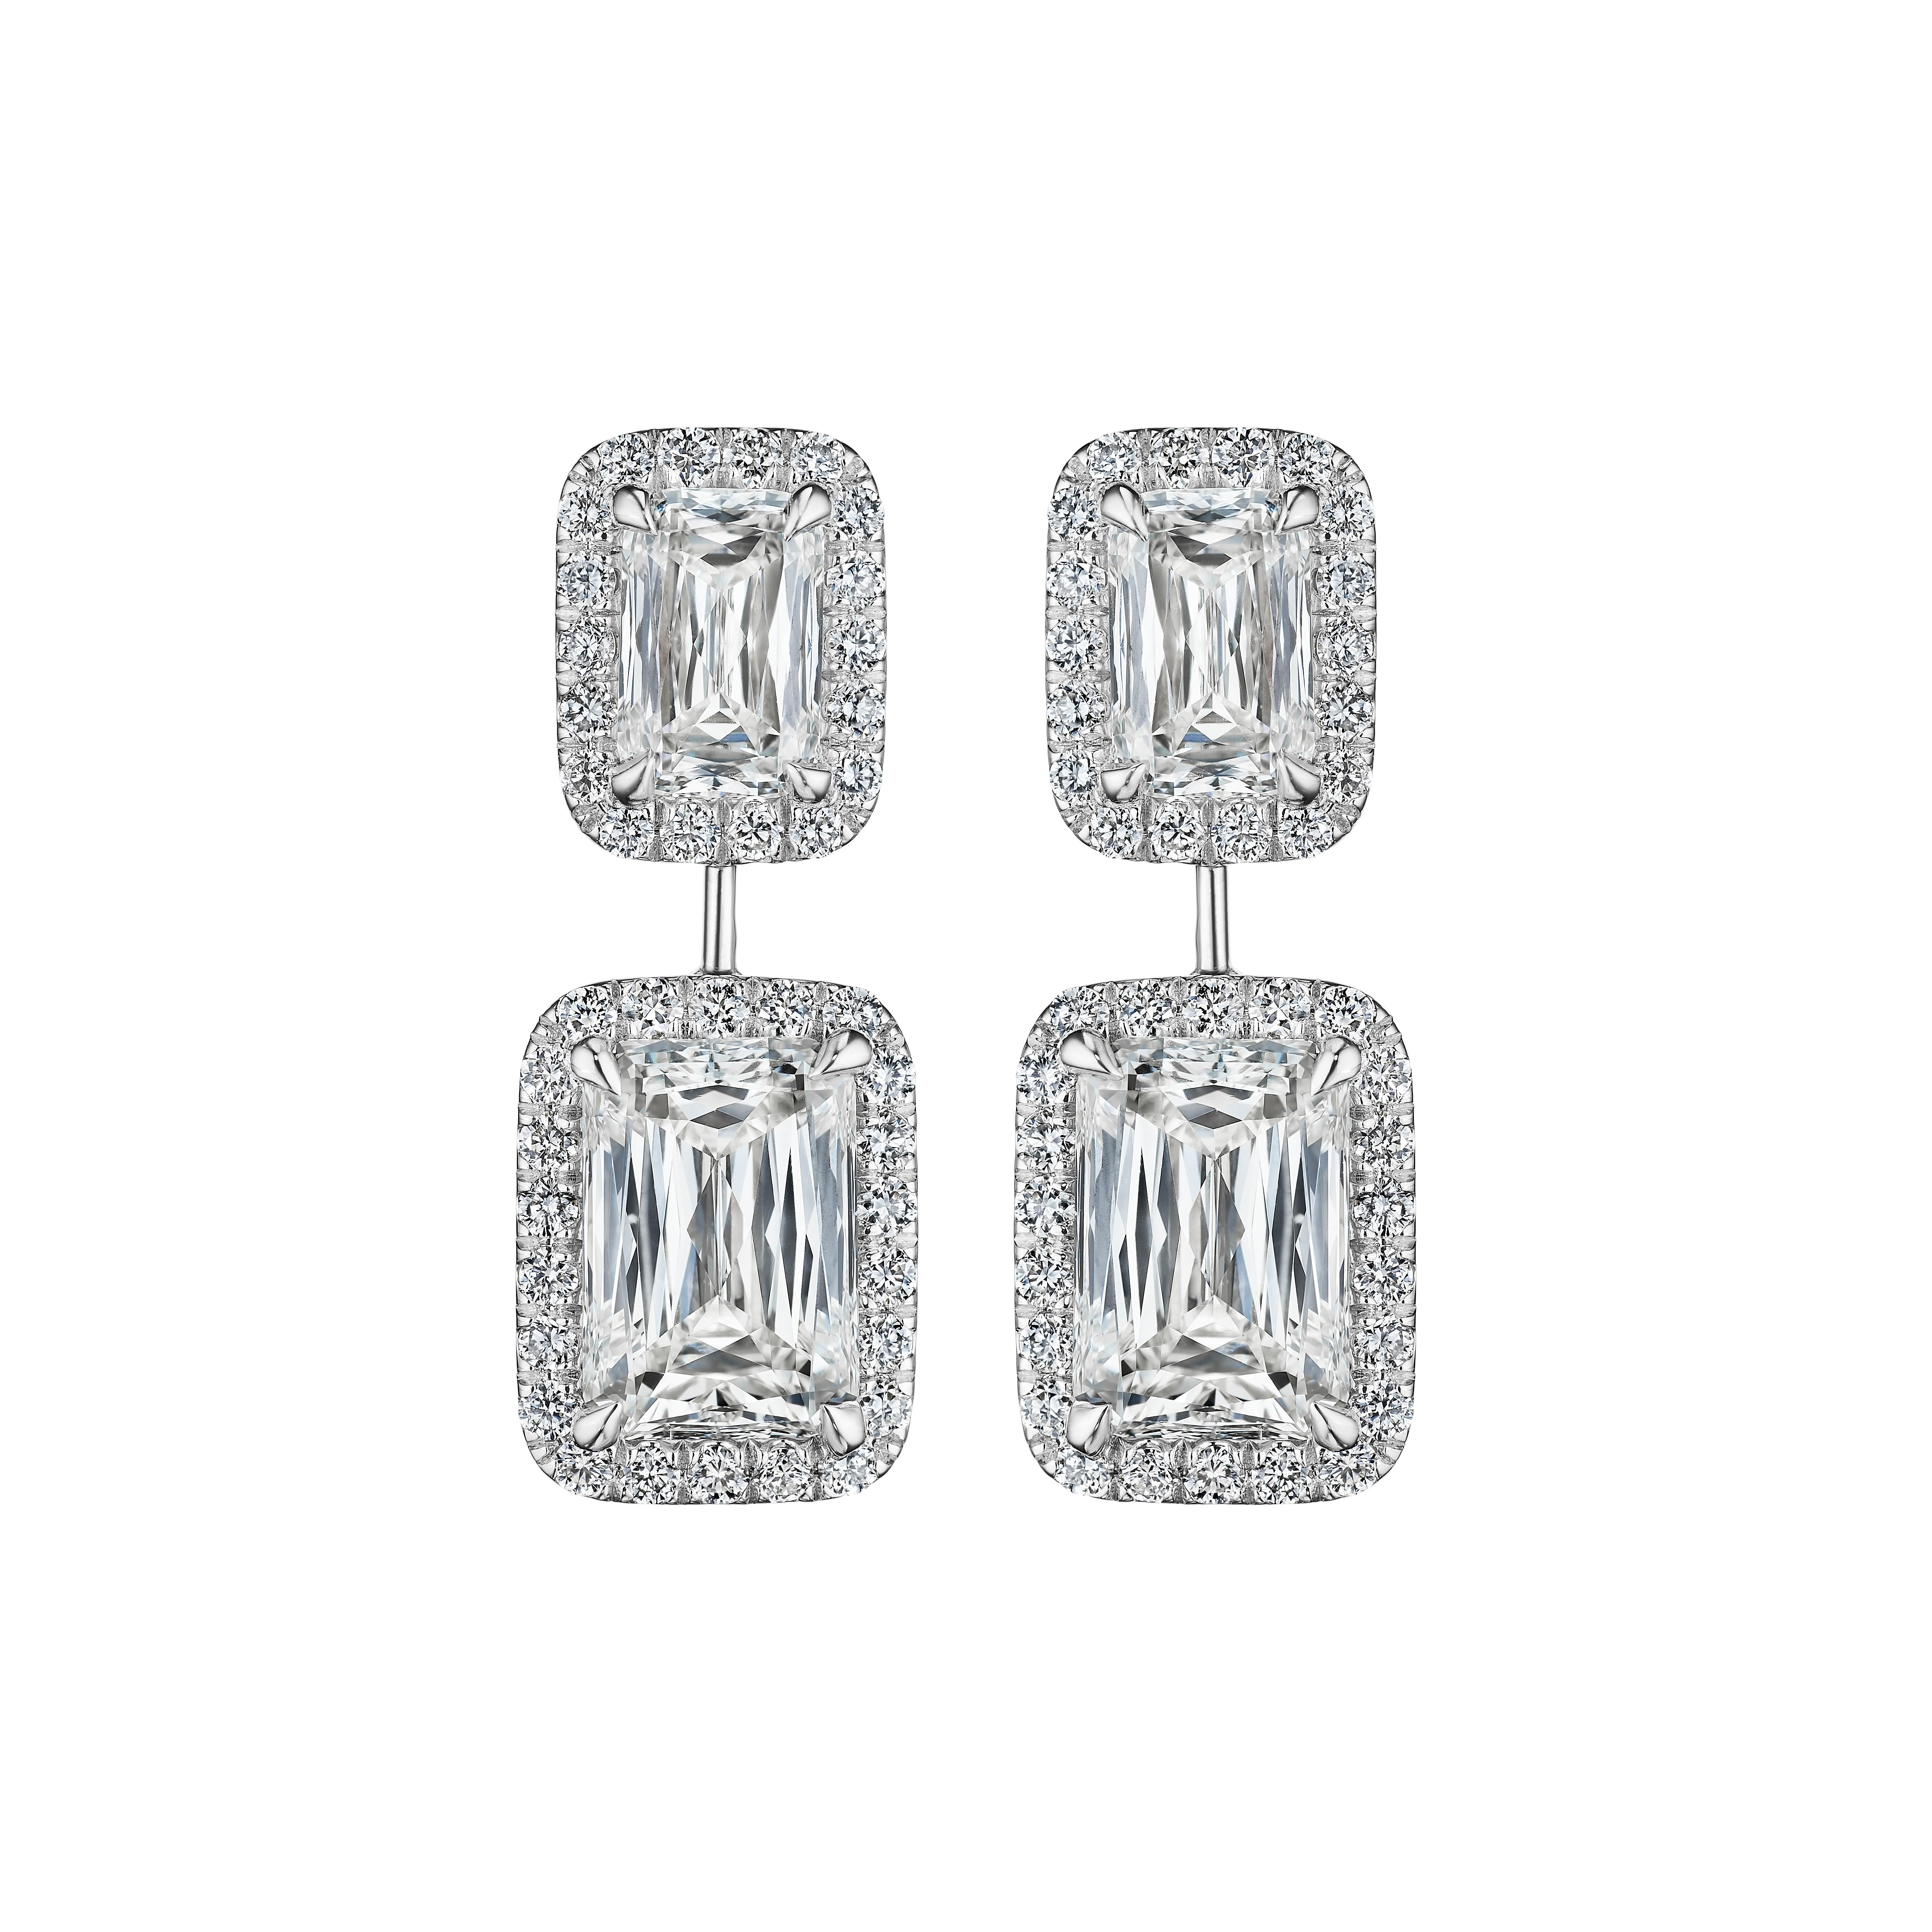 •	5.00ctw
•	18KT White Gold

•	Number of Modified Emerald Cut Diamonds: 2
•	Carat Weight: 3.00ctw
•	Color: I-J
•	Clarity: SI1-SI2
•	GIA: 6224918244 & 5222929084

•	Number of Modified Emerald Cut Diamonds: 2
•	Carat Weight: 1.42ctw
•	Color: